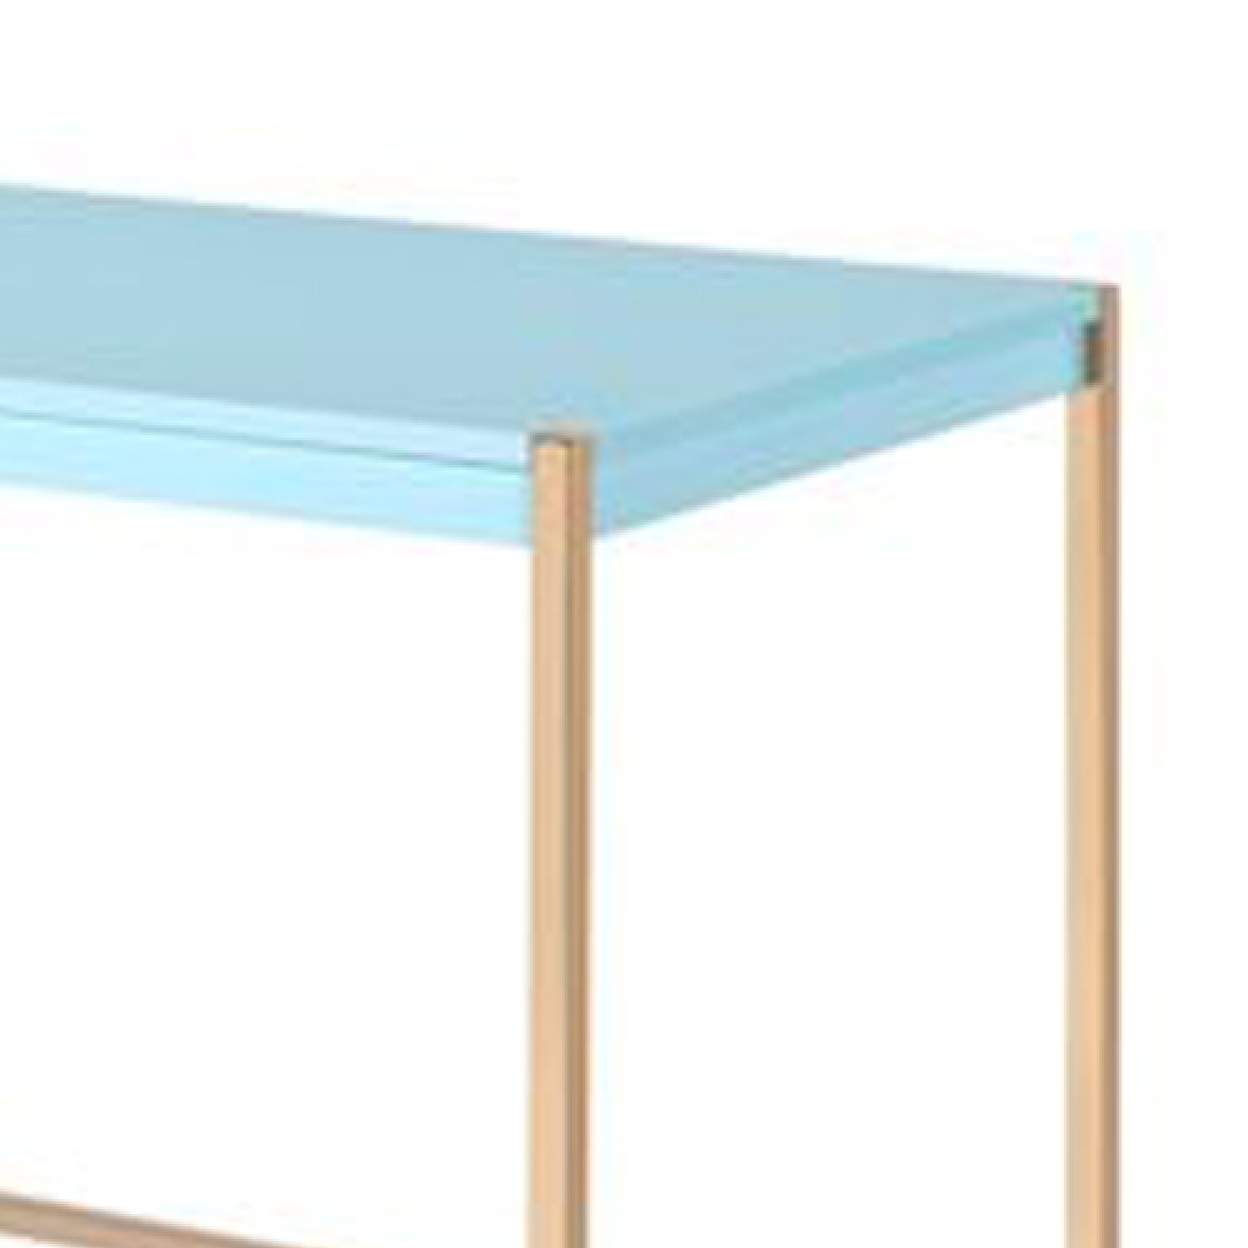 Writing Desk With USB Dock And Metal Legs, Sky Blue And Gold- Saltoro Sherpi